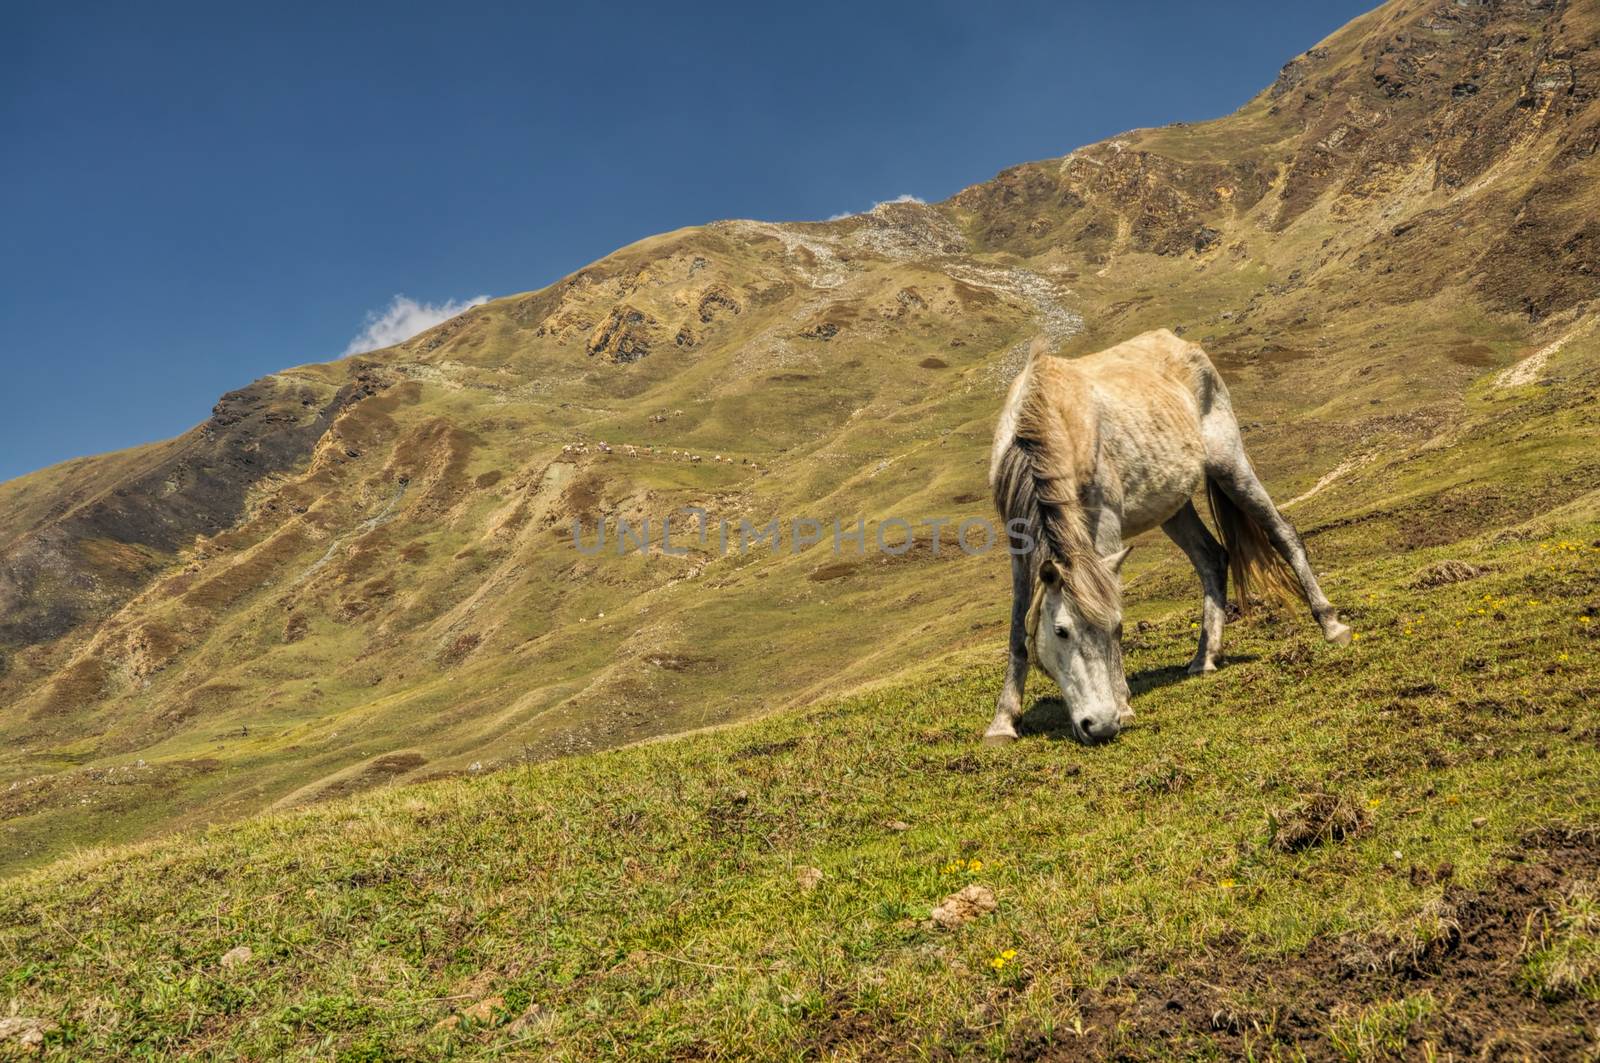 Horse grazing in scenic nepalese countryside